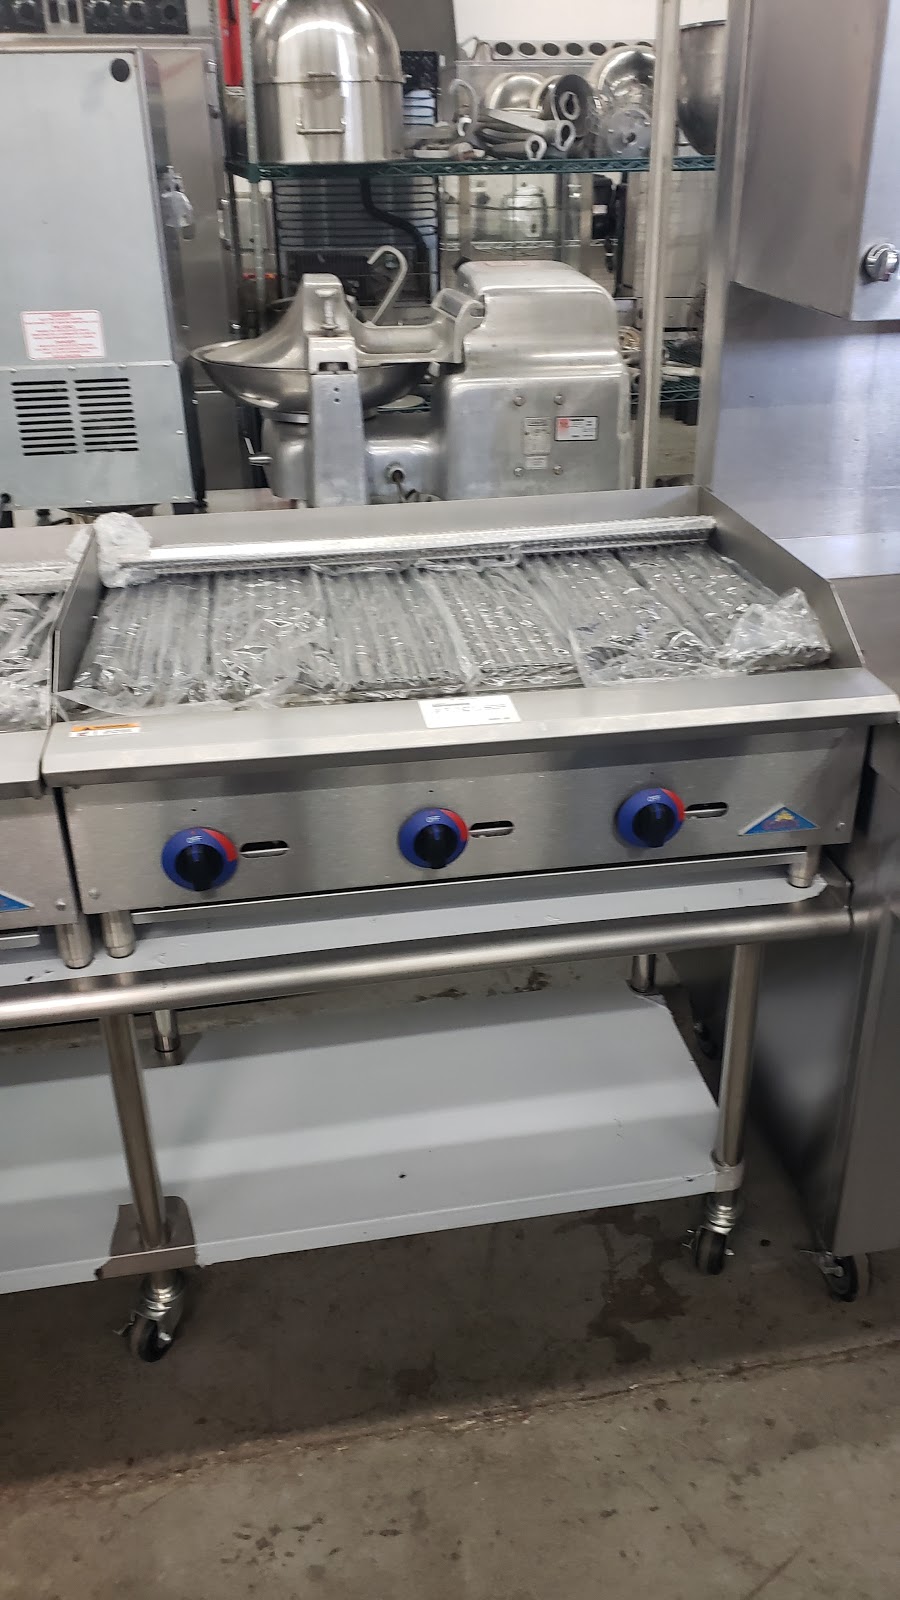 March Quality New and Pre-Owned Foodservice Equipment | 930 W Fullerton Ave, Addison, IL 60101 | Phone: (630) 627-3031